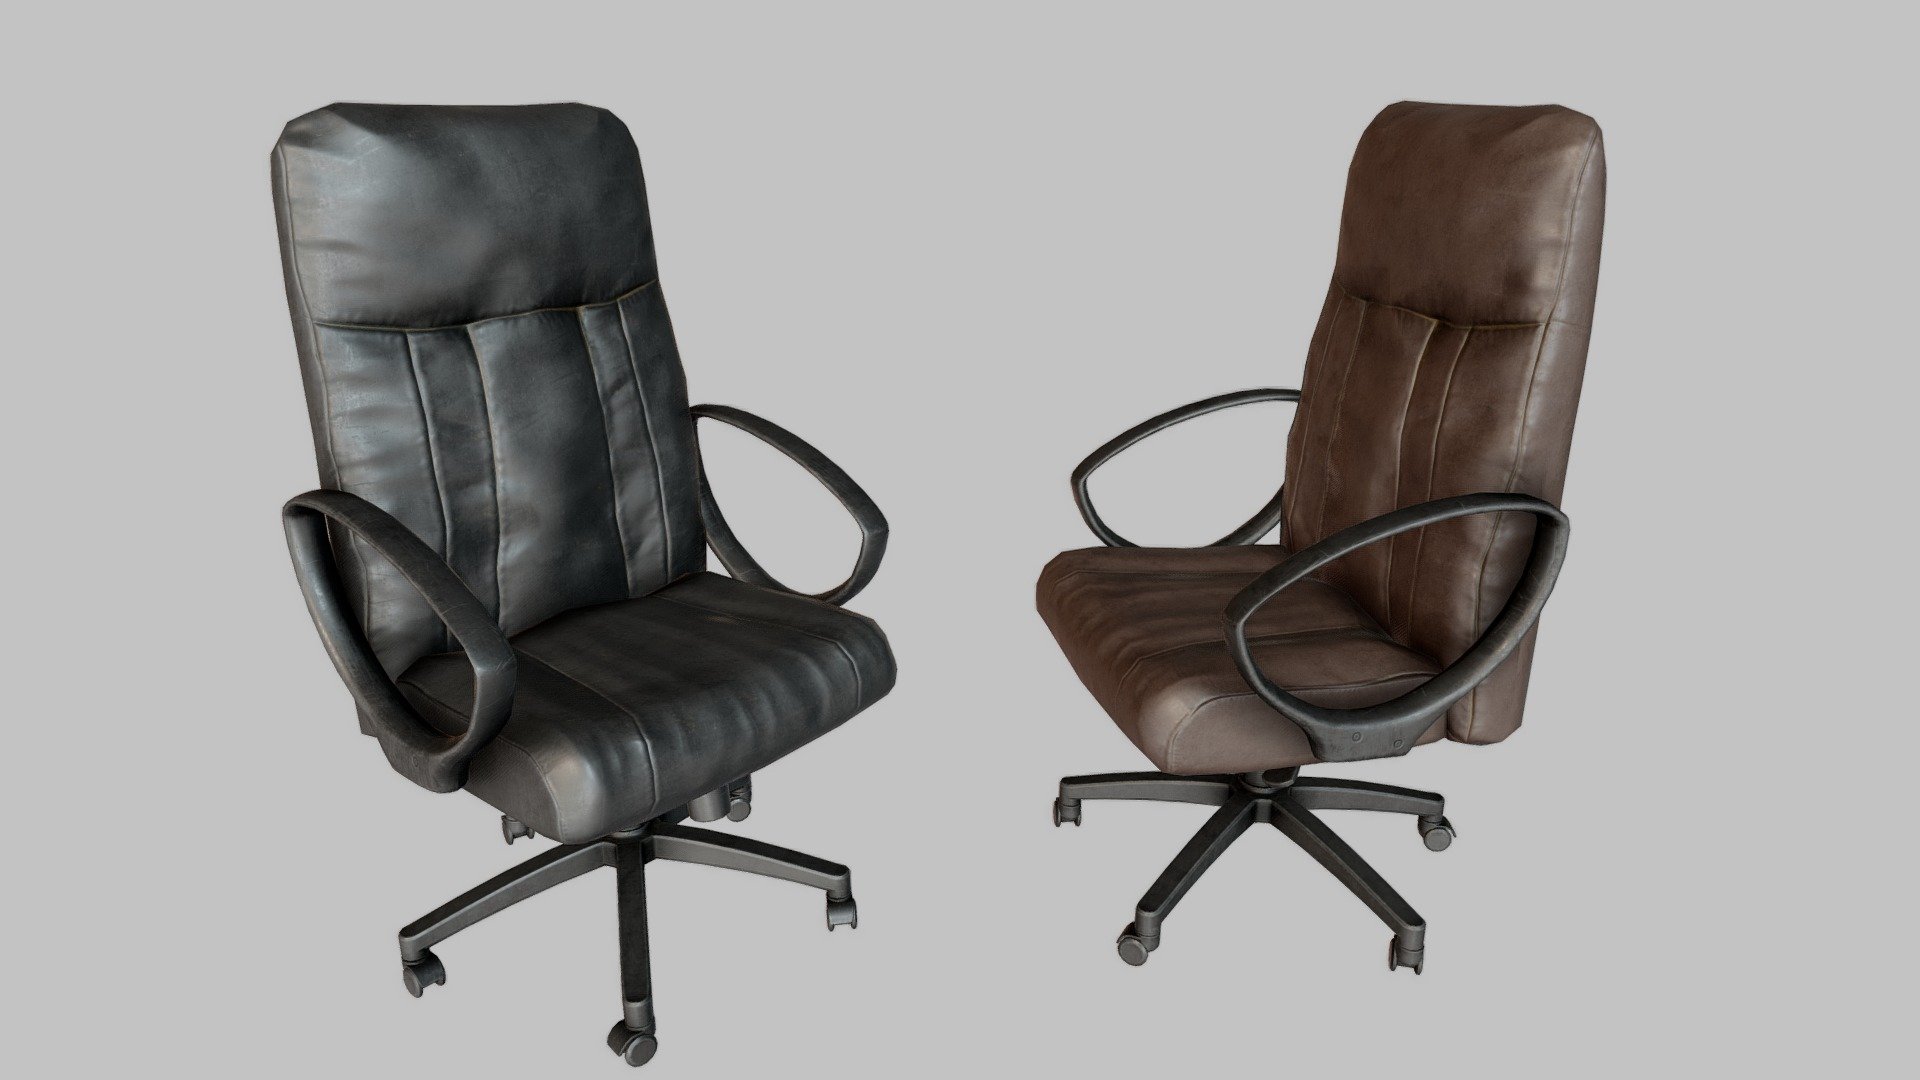 Old Office Chair PBR

Very Detailed Low Poly Old Office Chair with High-Quality PBR Texturing. 

Fits perfect for any PBR game as Decoration etc.

The Leg, and wheels are seperated from the chair so that they can be rotated or animated if needed.

Created with 3DSMAX, Zbrush and Substance Painter.

Standard Textures
Base Color, Metallic, Roughness, Height, AO, Normal, Maps

Unreal 4 Textures
Base Color, Normal, OcclusionRoughnessMetallic

Unity 5/2017 Textures
Albedo, SpecularSmoothness, Normal, and AO Maps

4096x4096 TGA Textures

Please Note, this PBR Textures Only. 

Low Poly Triangles 

6708 Tris
3464 Verts

File Formats :

.Max2018
.Max2017
.Max2016
.Max2015
.FBX
.OBJ
.3DS
.DAE - Old Office Chair PBR - Buy Royalty Free 3D model by GamePoly (@triix3d) 3d model